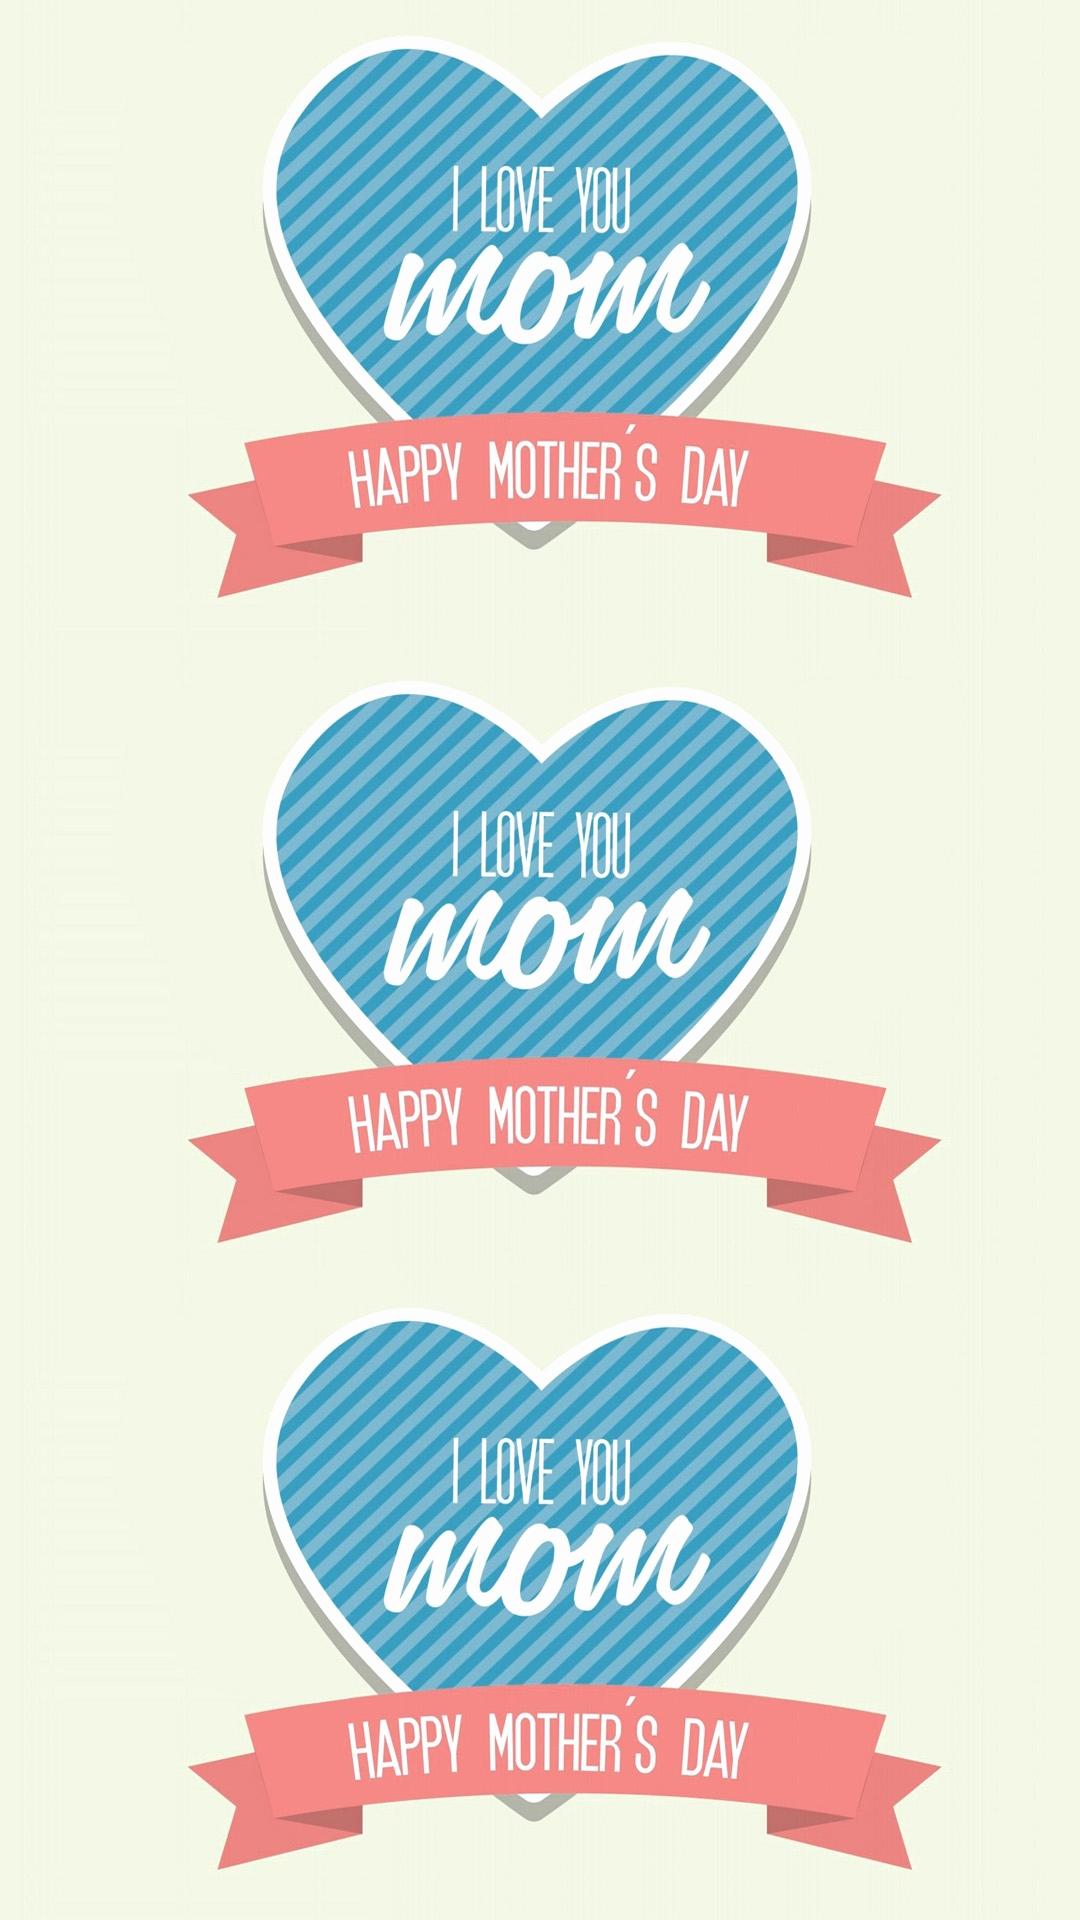 I Love You Mom Phone Wallpapers - Wallpaper Cave